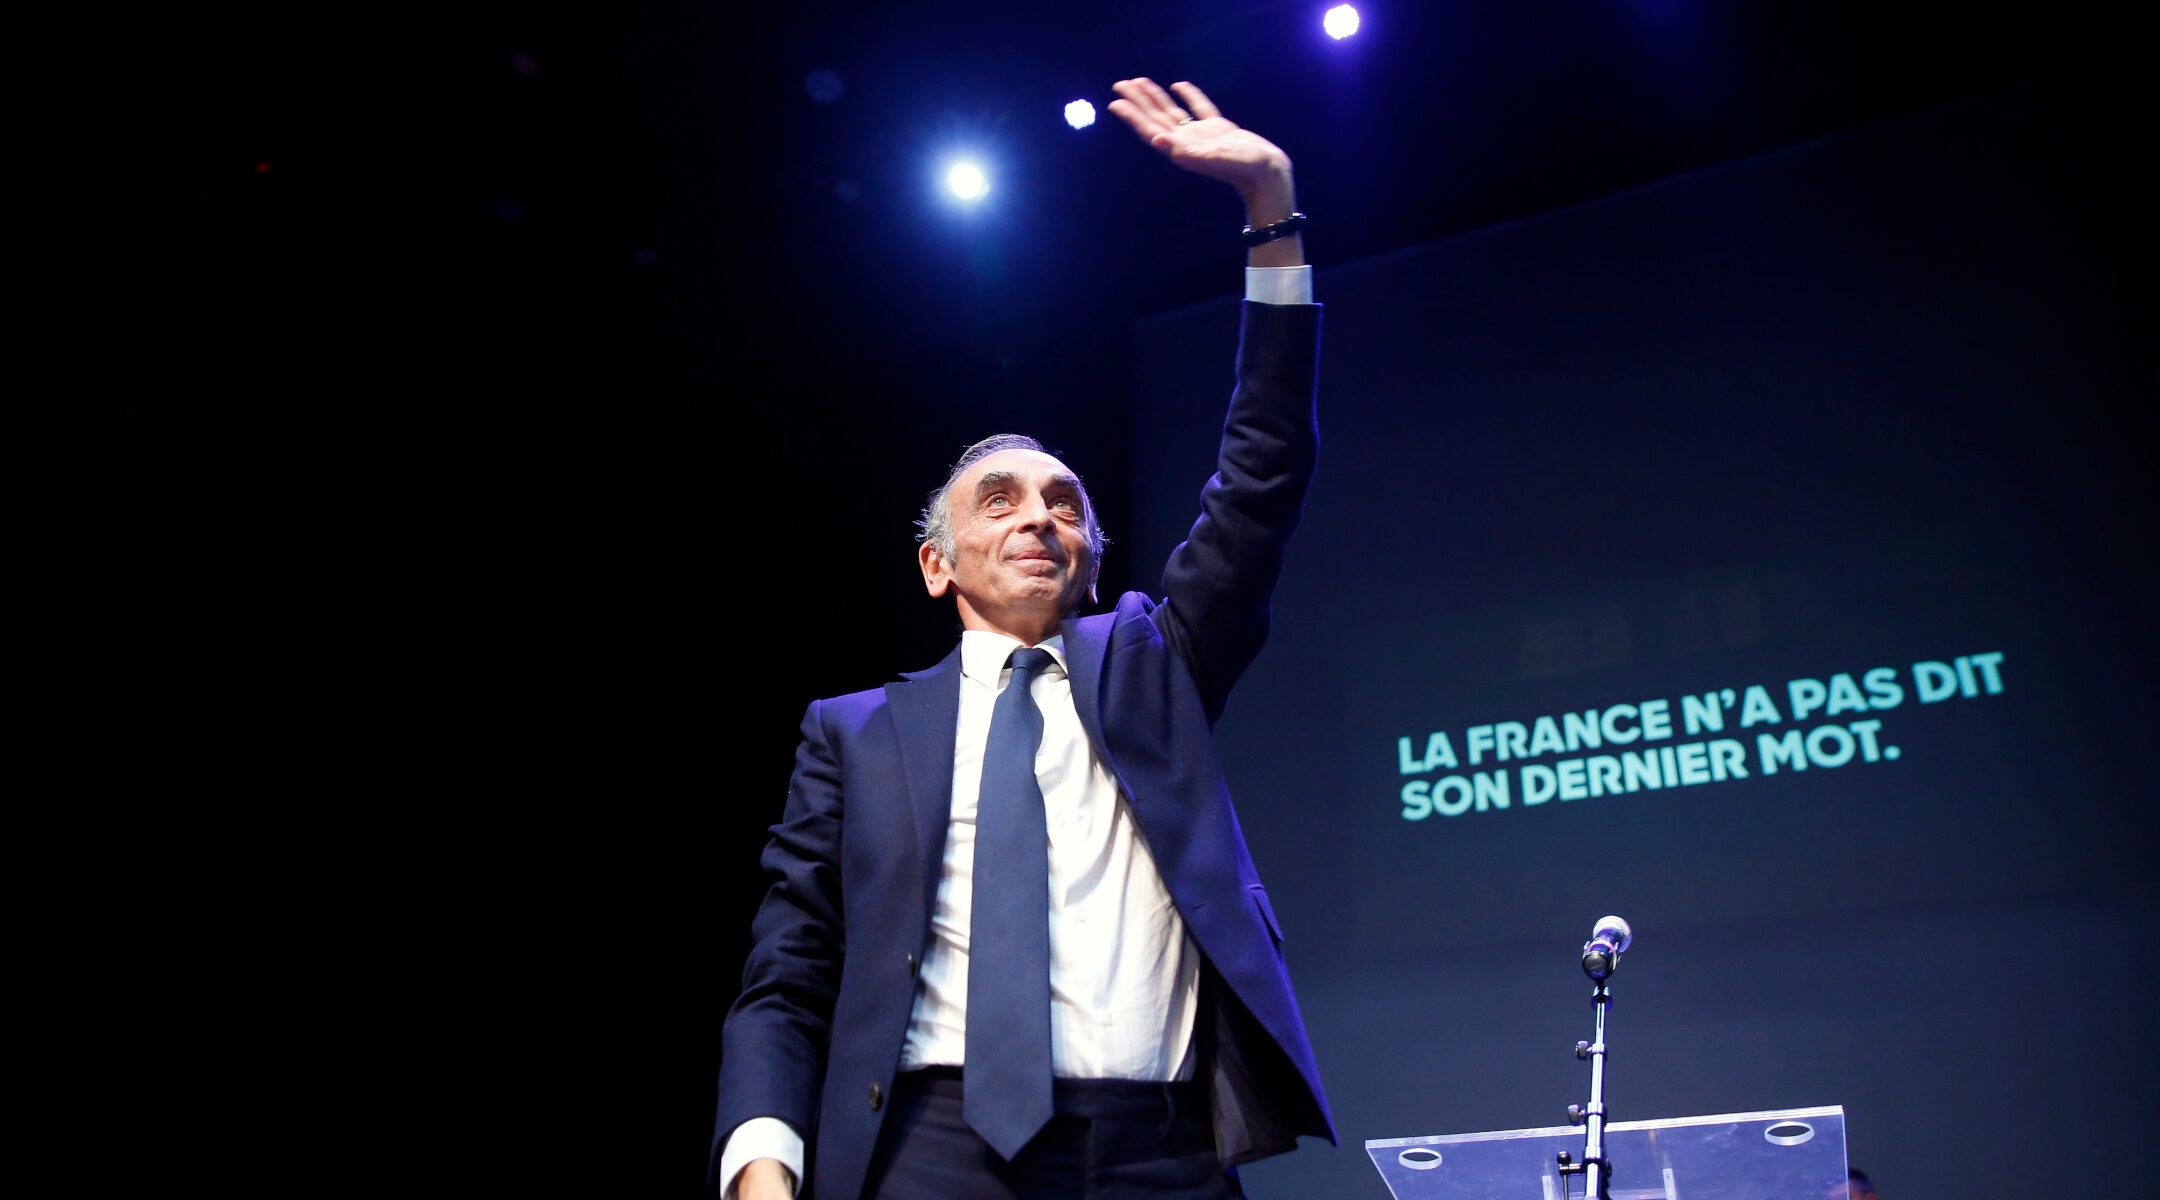 French essayist and political journalist Eric Zemmour arrives at a debate in Beziers, France on Oct, 16, 2021. (Chesnot/Getty Images)